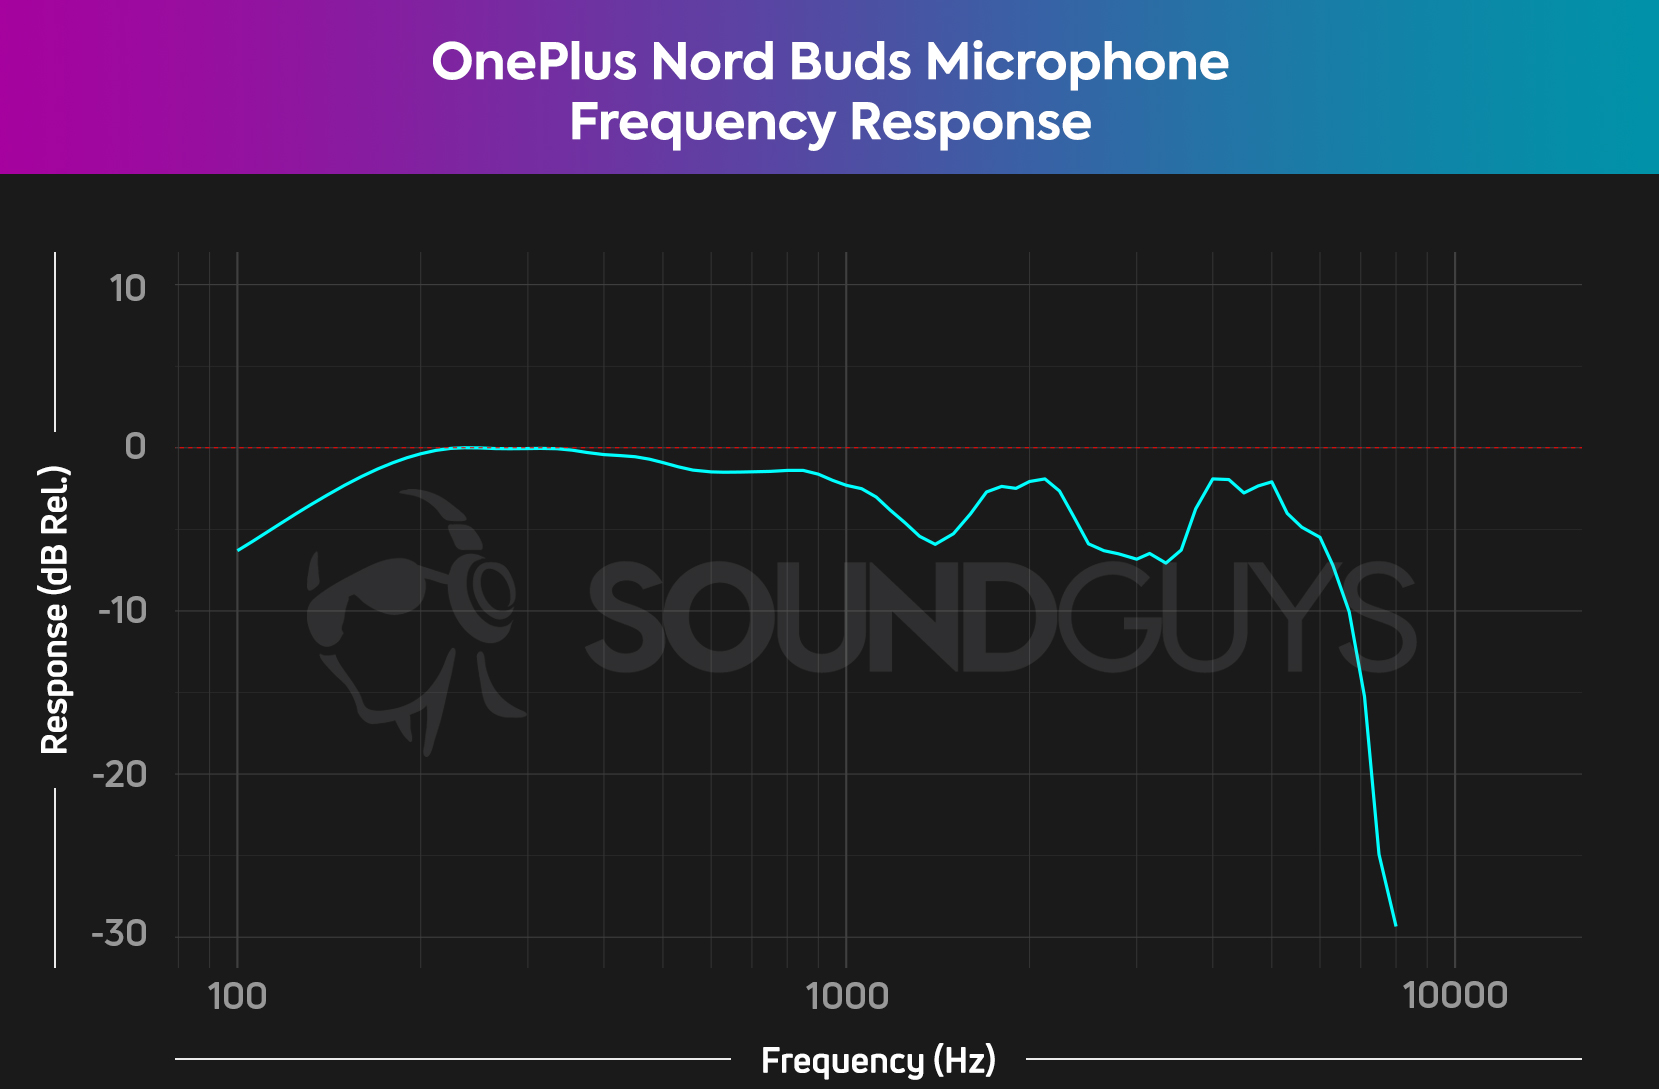 A frequency response chart for the OnePlus Nord Buds microphone, which shows decent output levels in the low end.